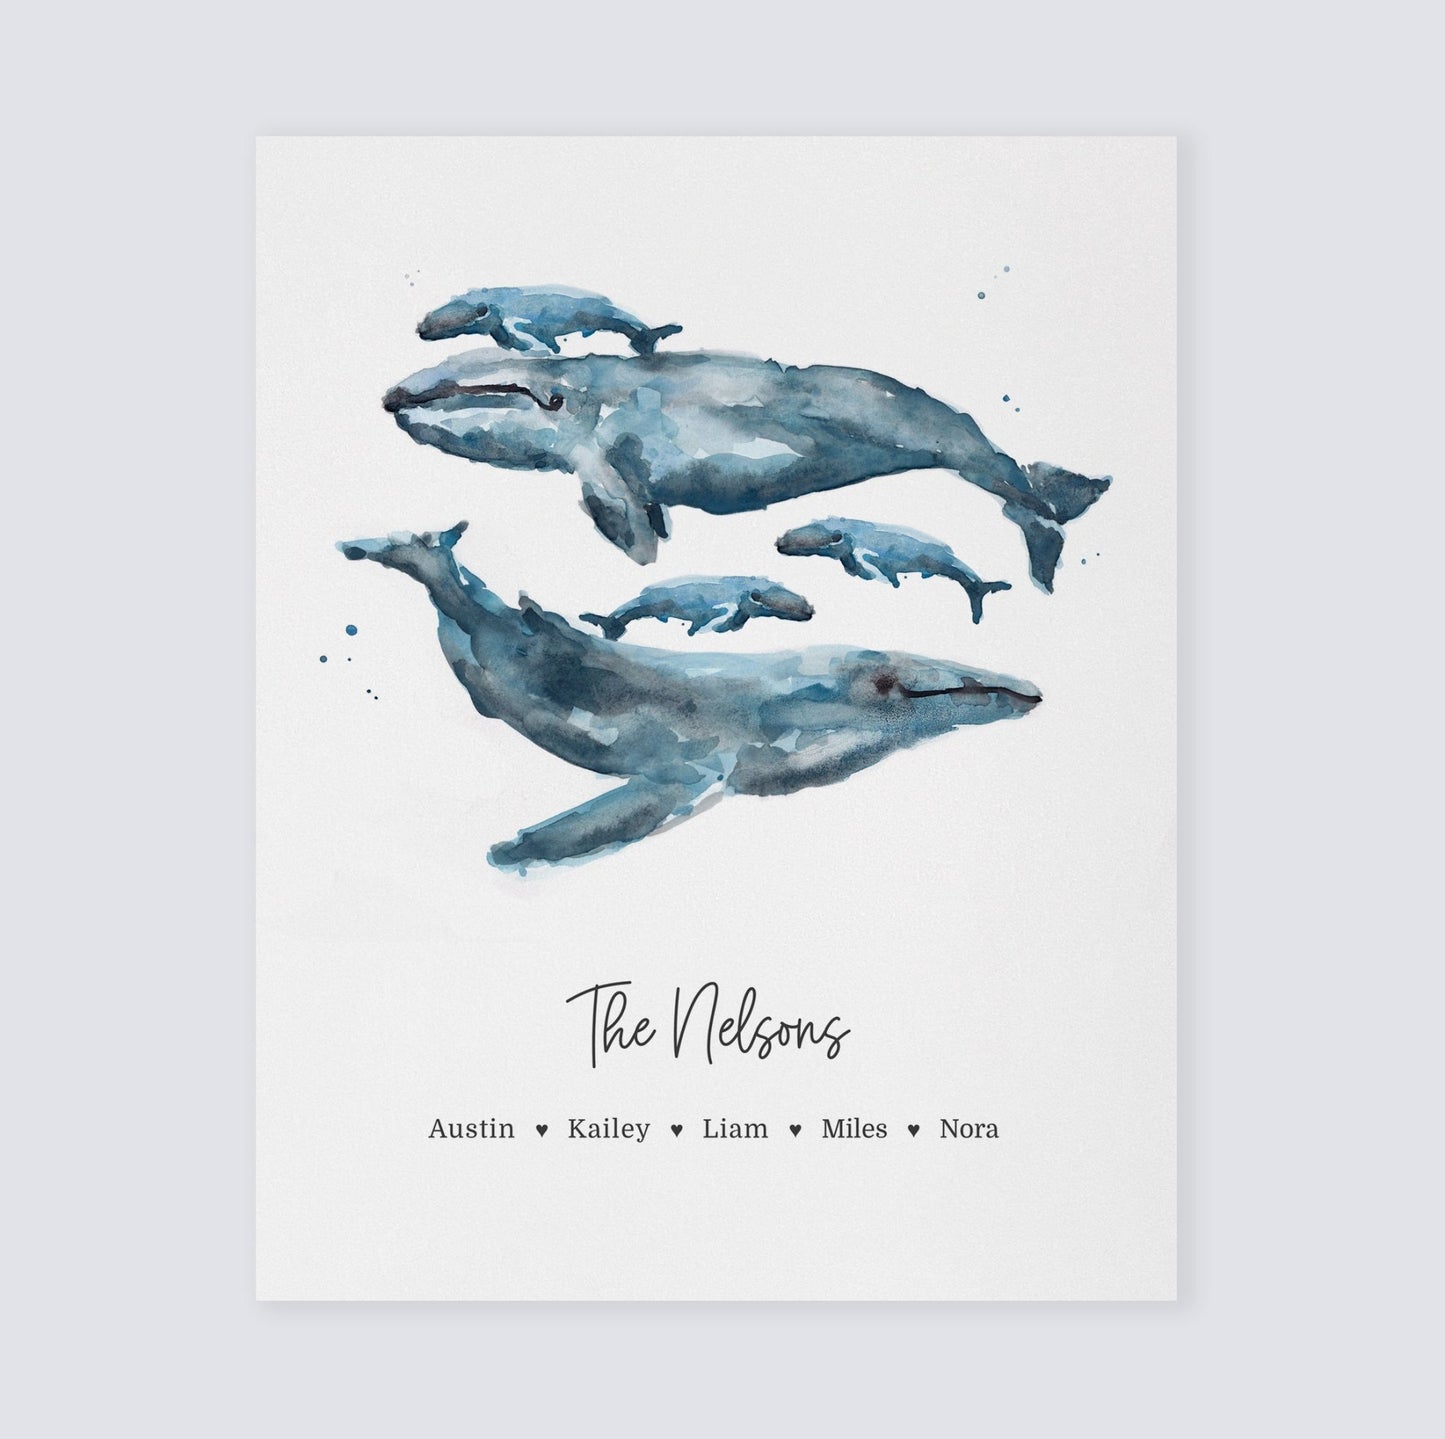 Whale Family Personalized Print - Gift for Family - Nautical Art Prints - Moon Rock Prints